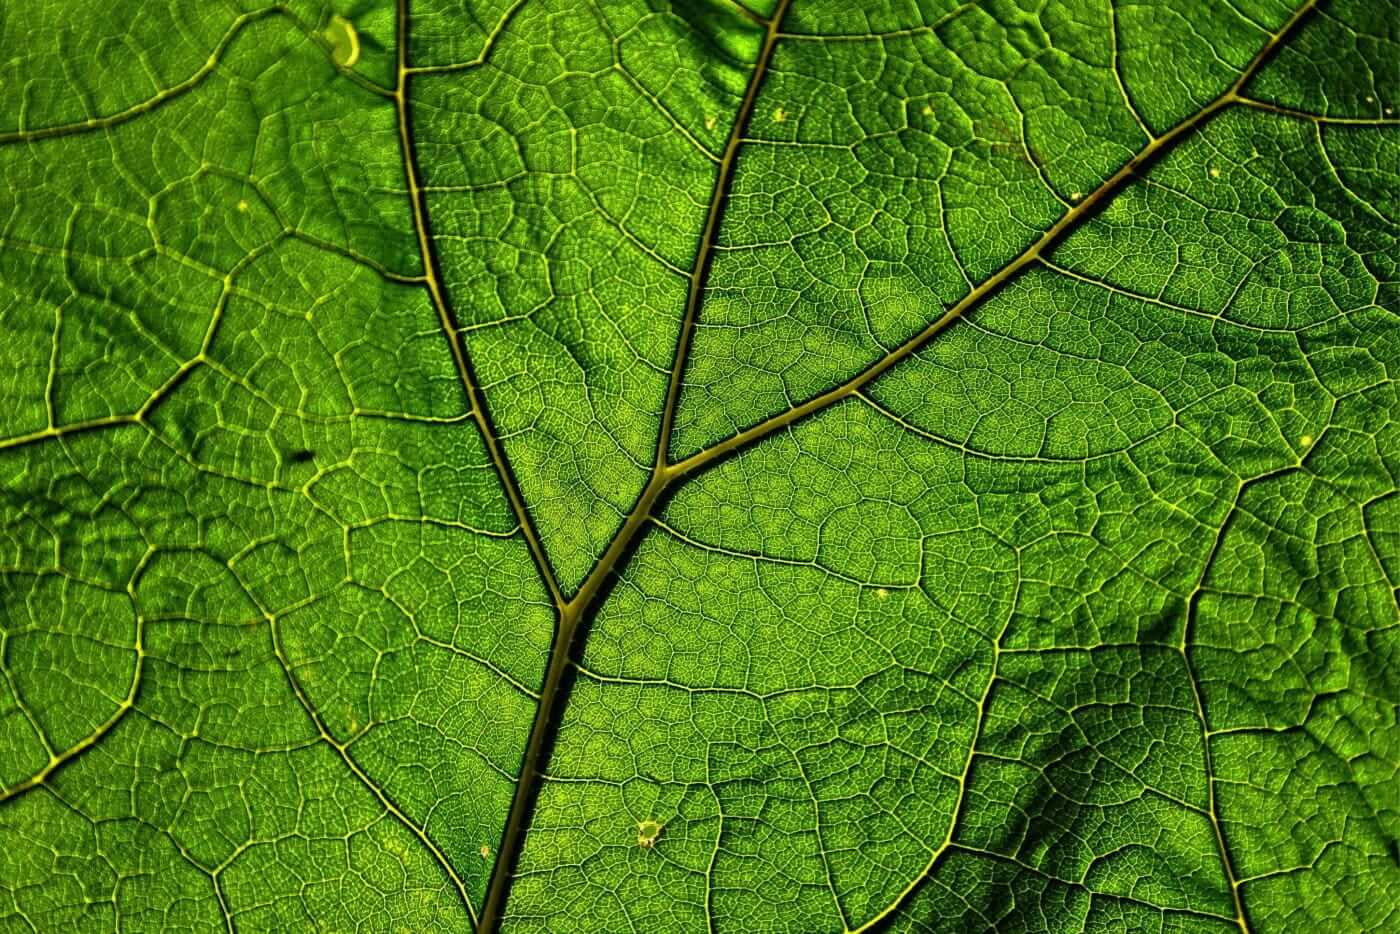 Red Vein And Green Vein Kratom: What’s the Difference?